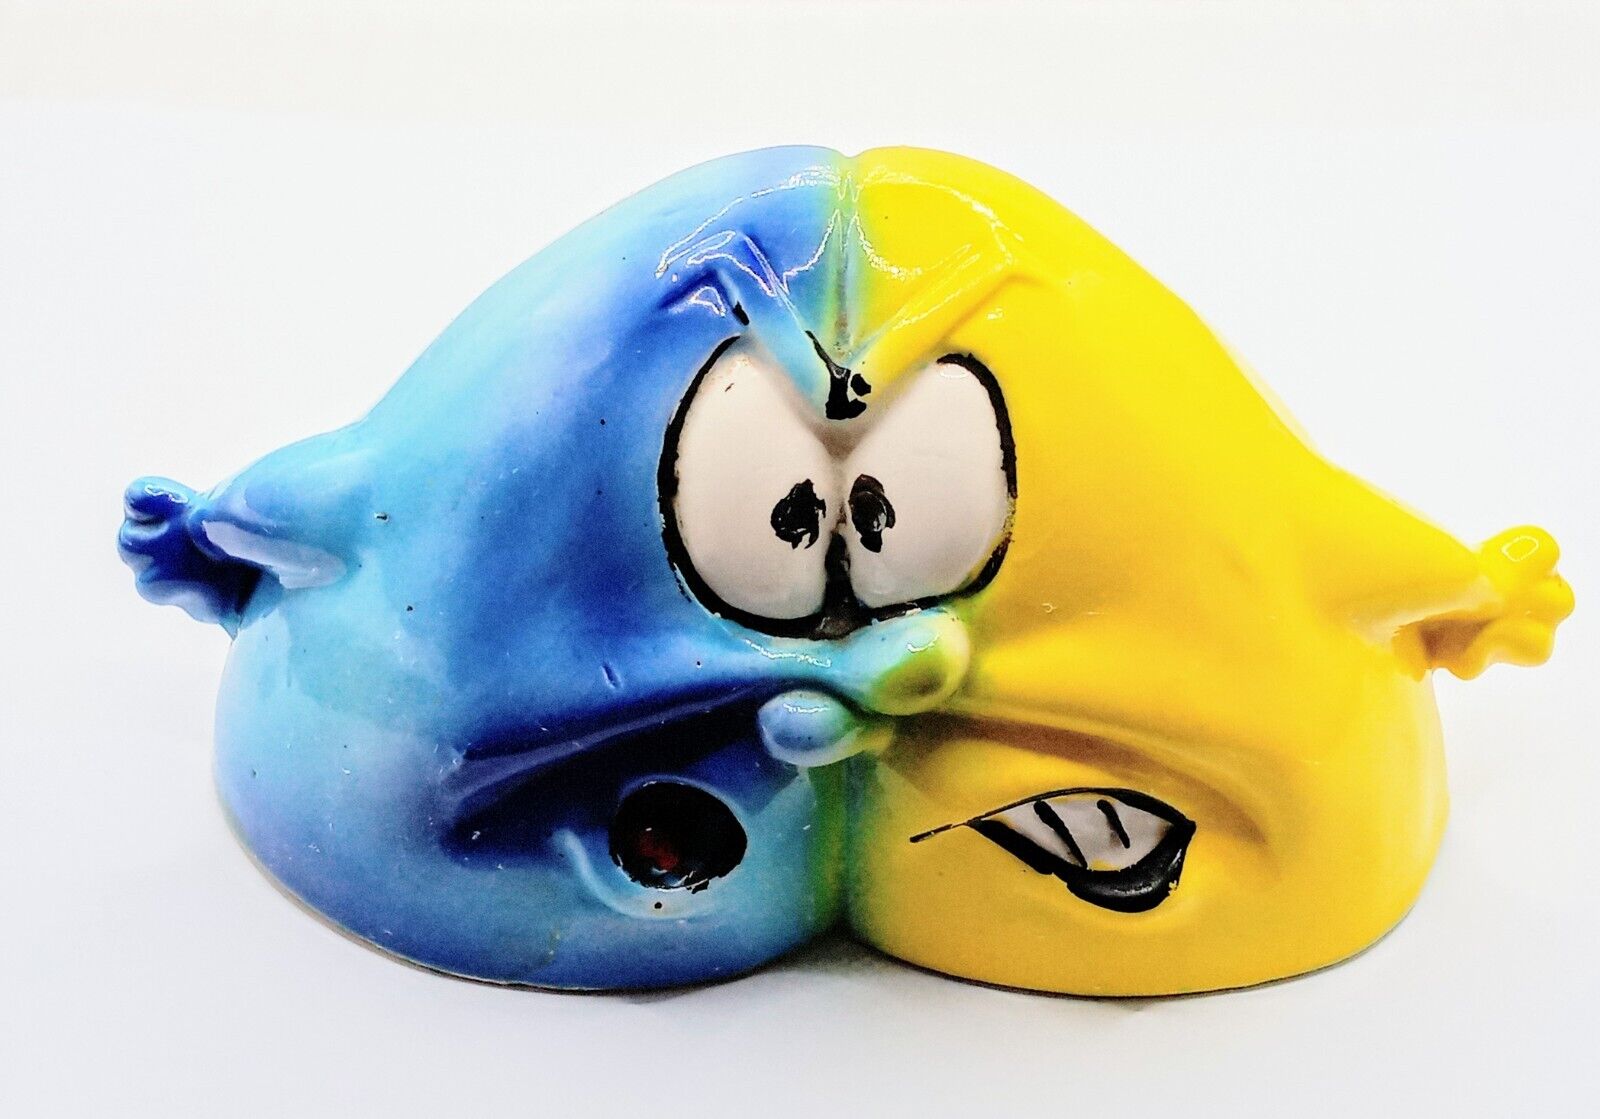 Kreiss Psycho Ceramics Yellow & Blue Double Faced Psycho Blob With Arms